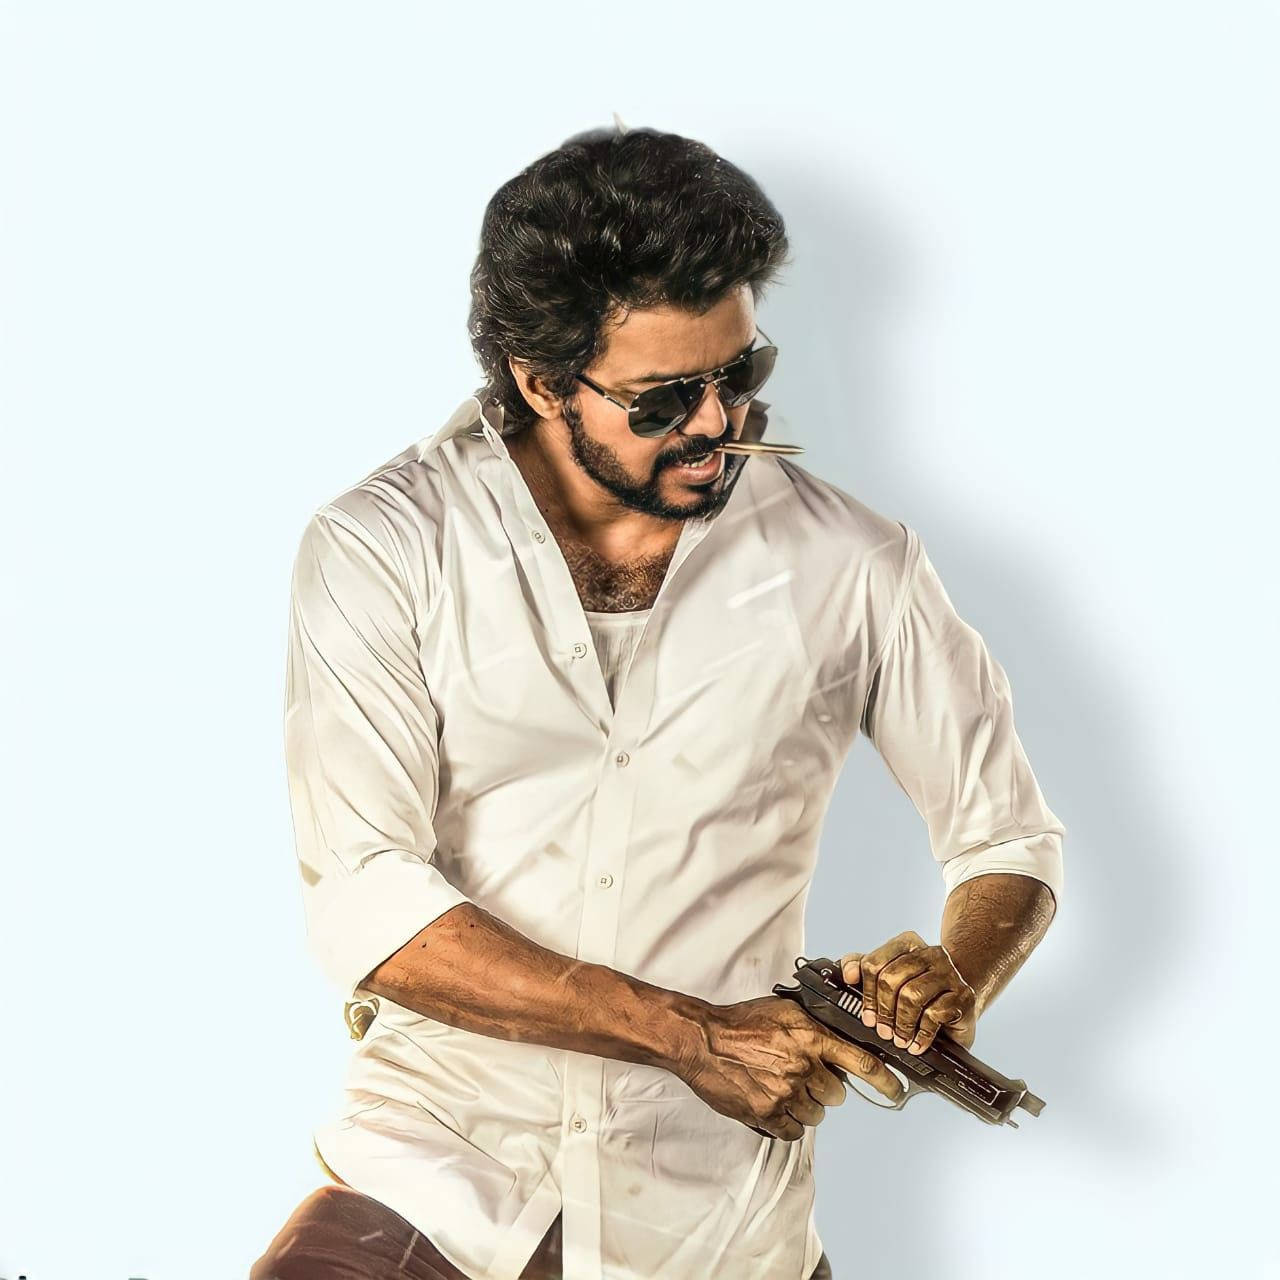 100+] Beast Vijay Wallpapers for FREE | Wallpapers.com